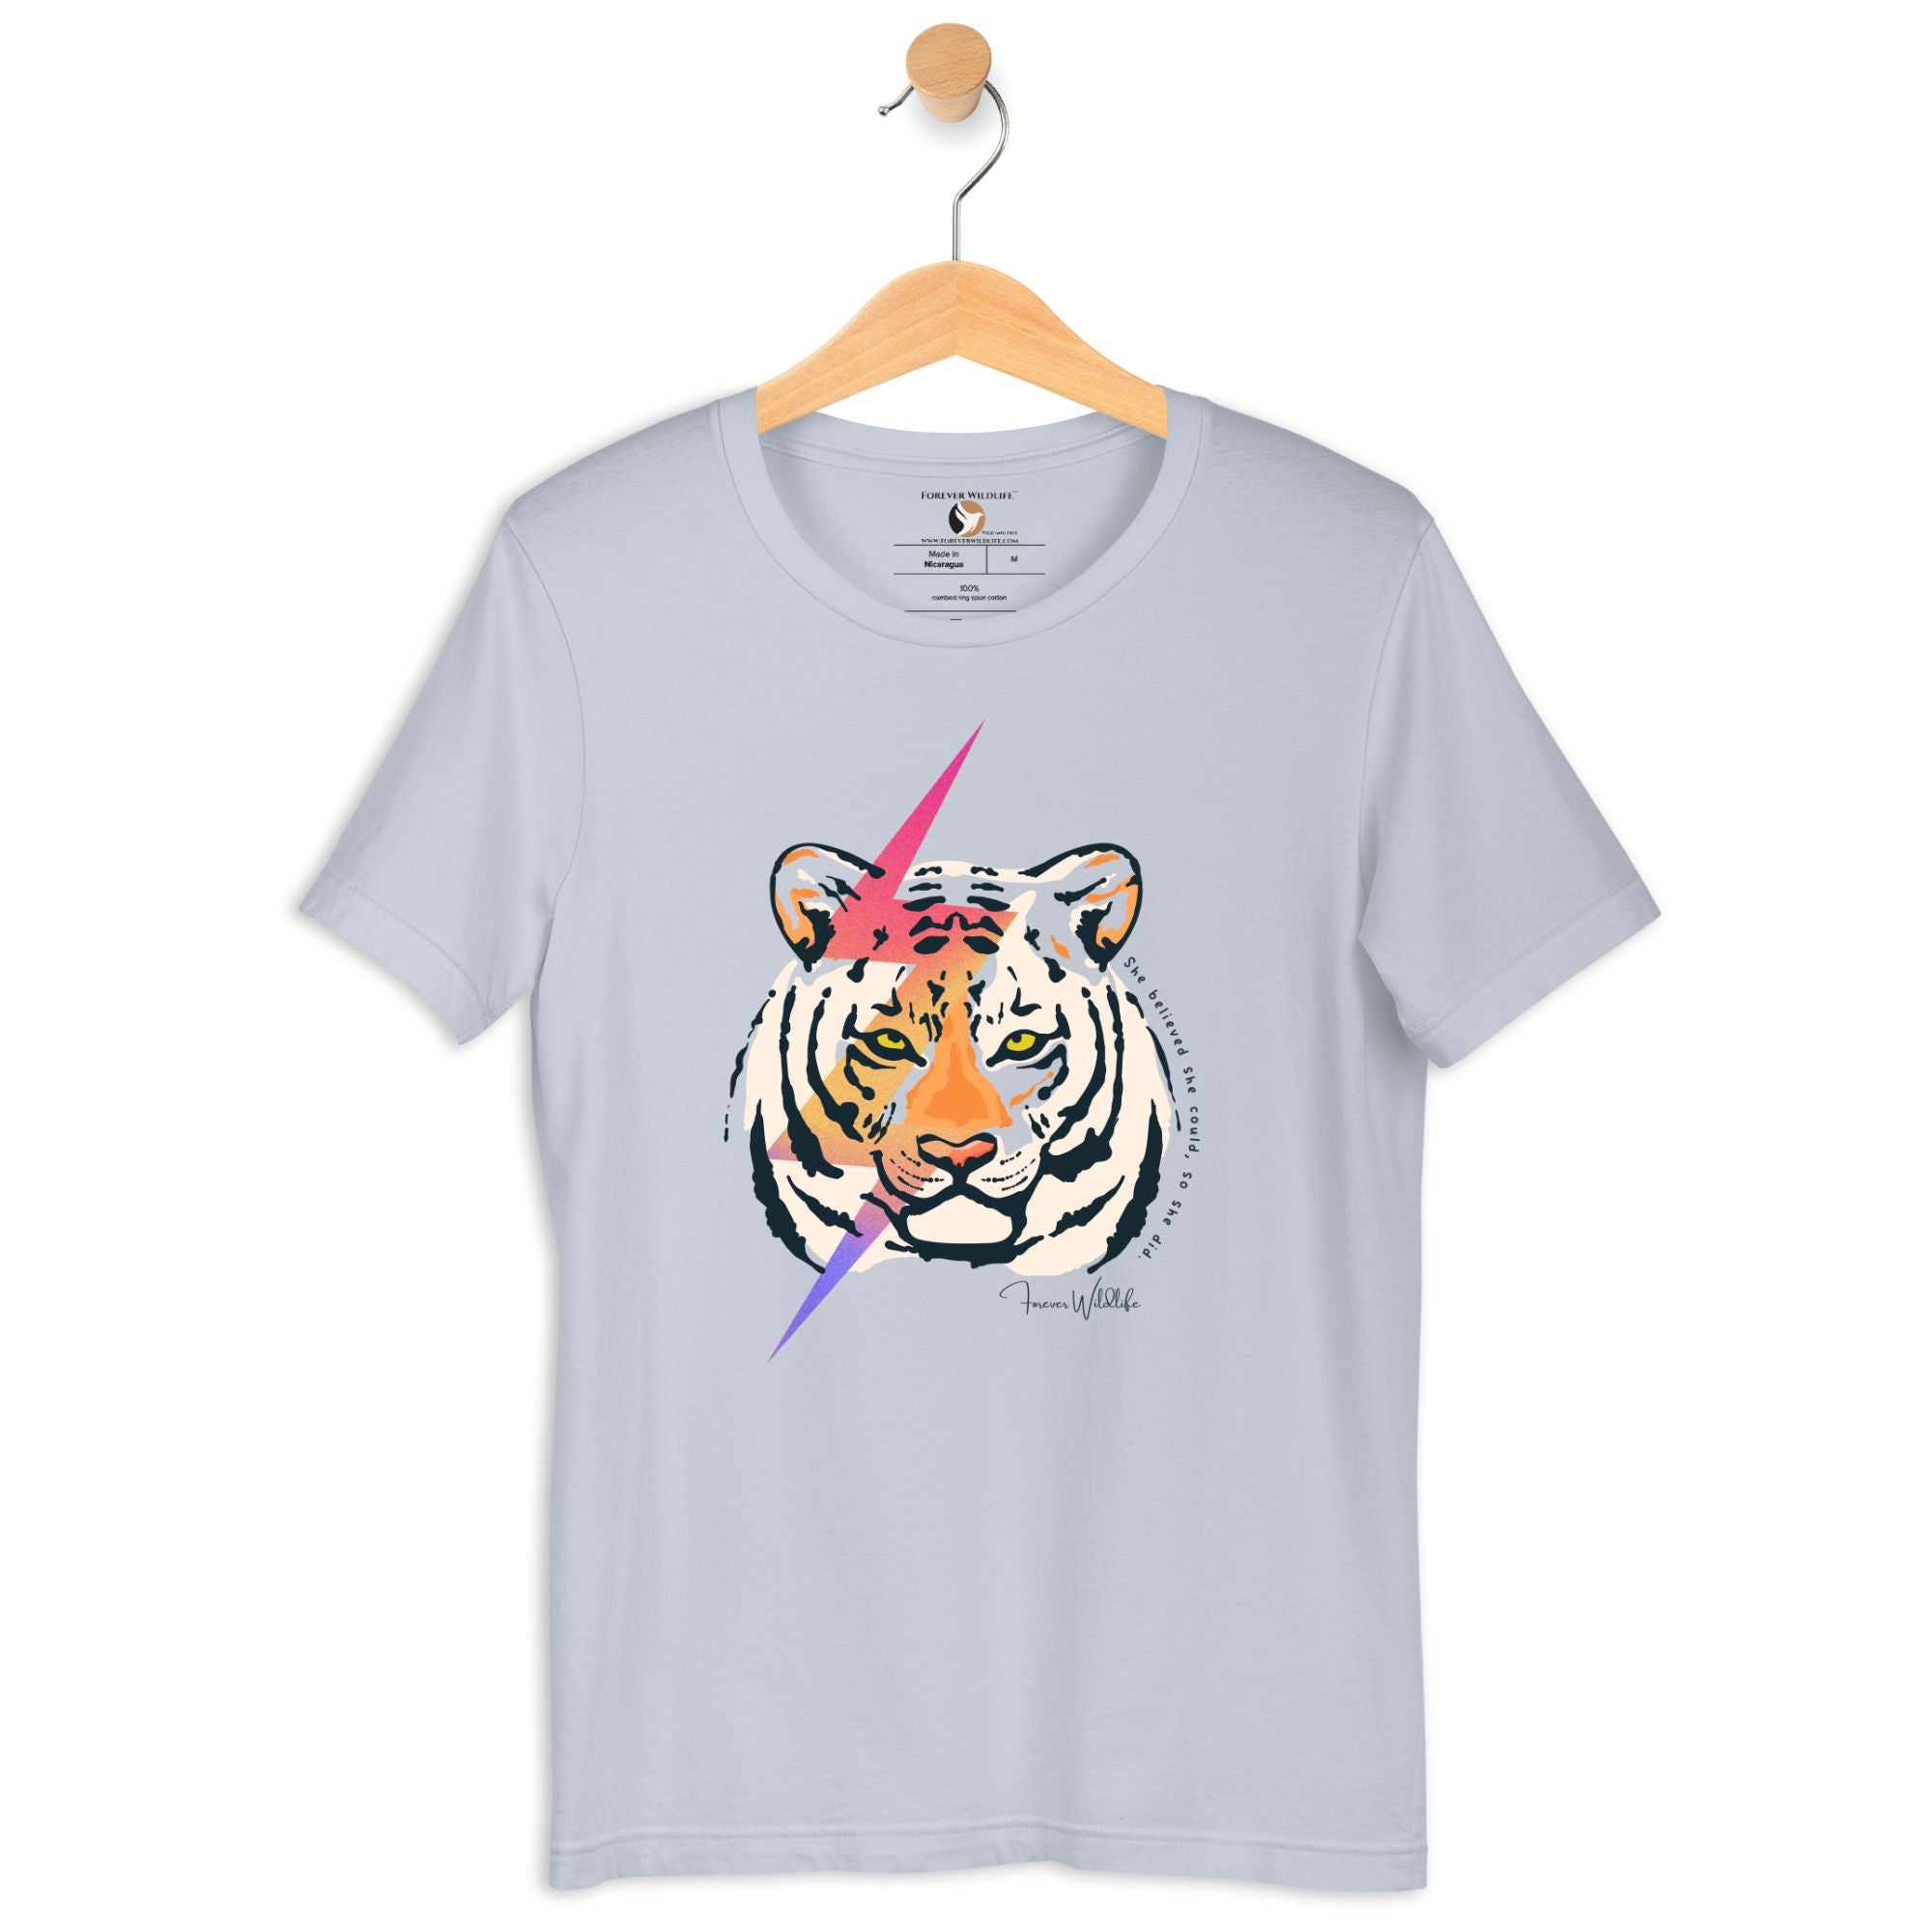 Tiger T-Shirt in Light Blue – Premium Wildlife T-Shirt Design with She Believed She Could So She Did Text, Tiger Shirts & Wildlife Clothing